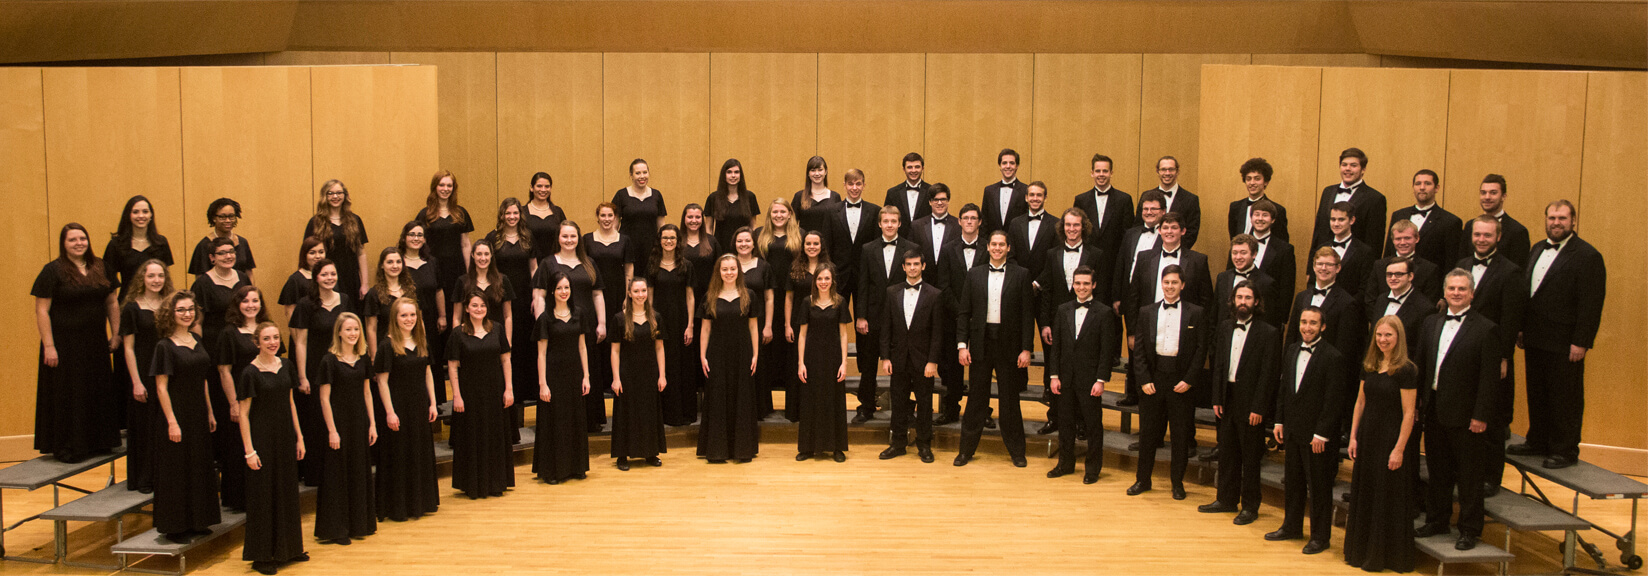 University Singers group picture in Minsky Recital Hall